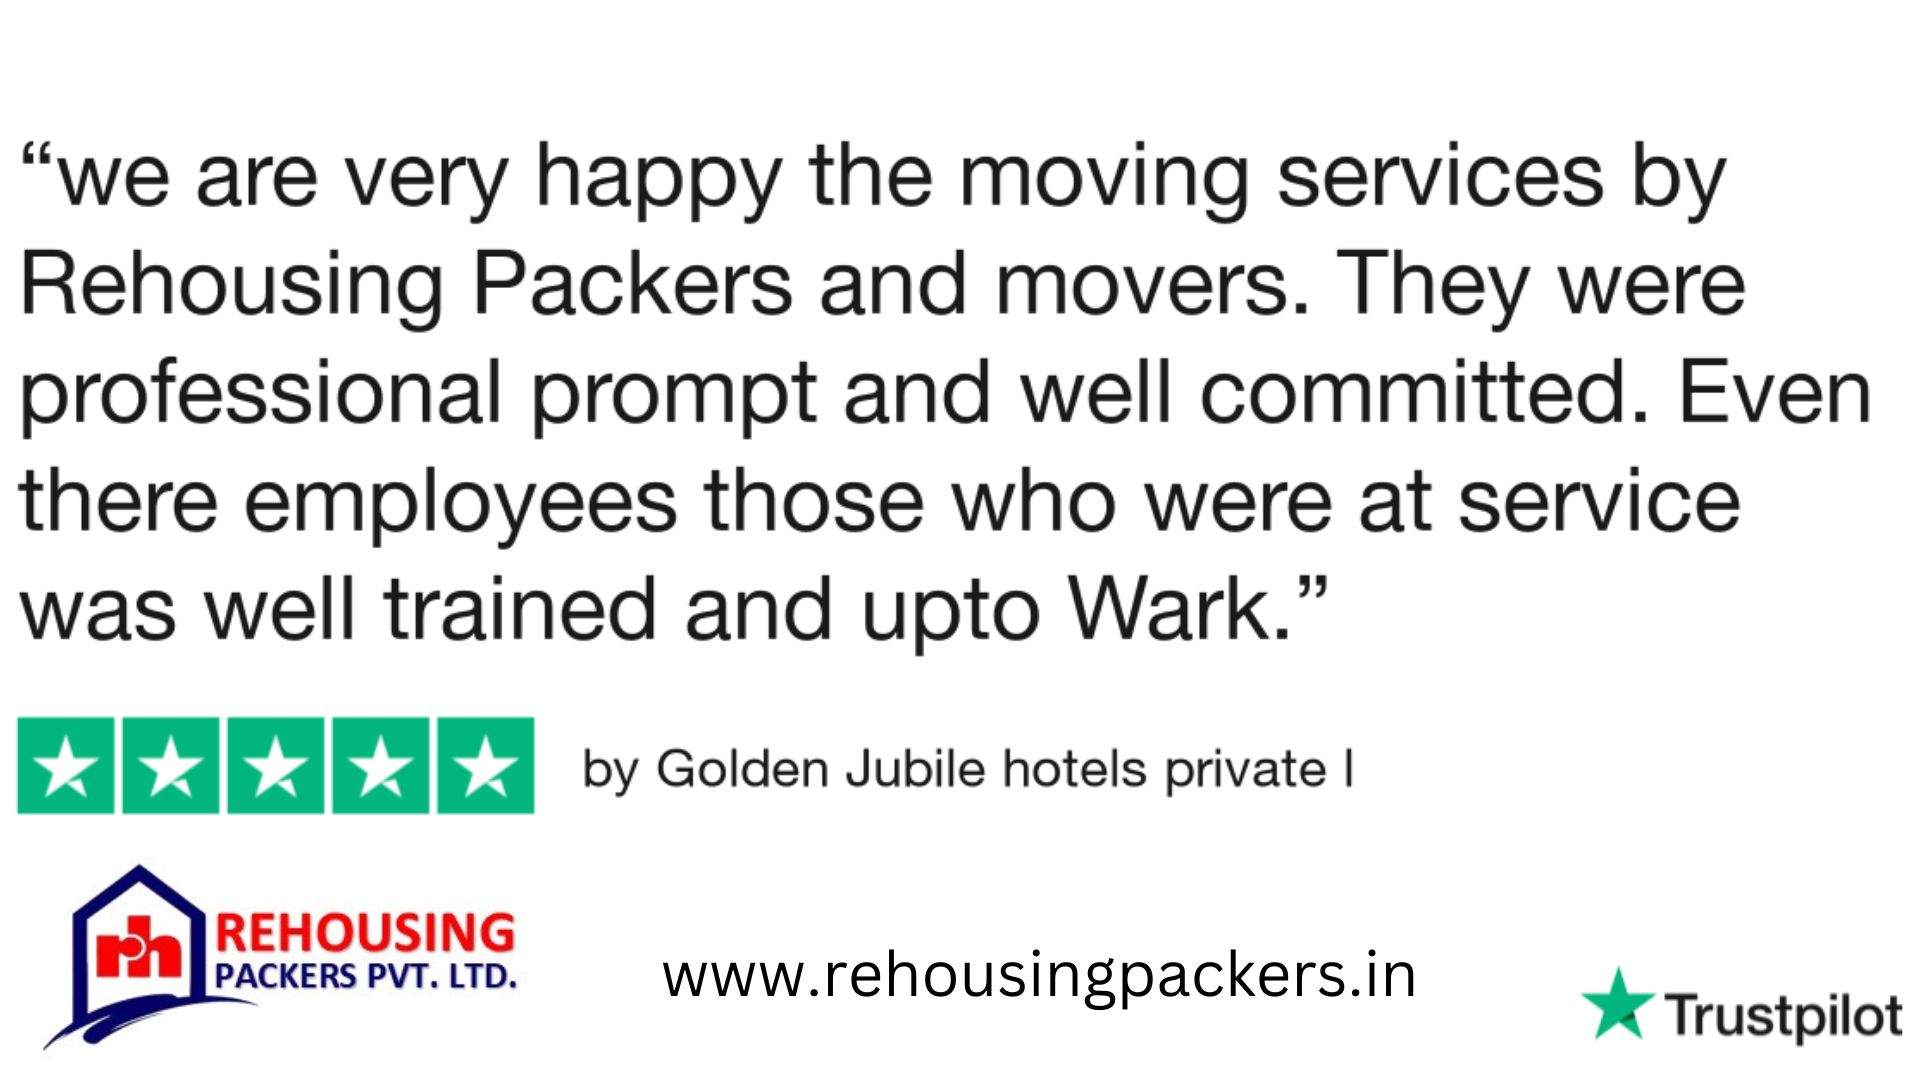 Rehousing packers and movers reviews trustpilot 10